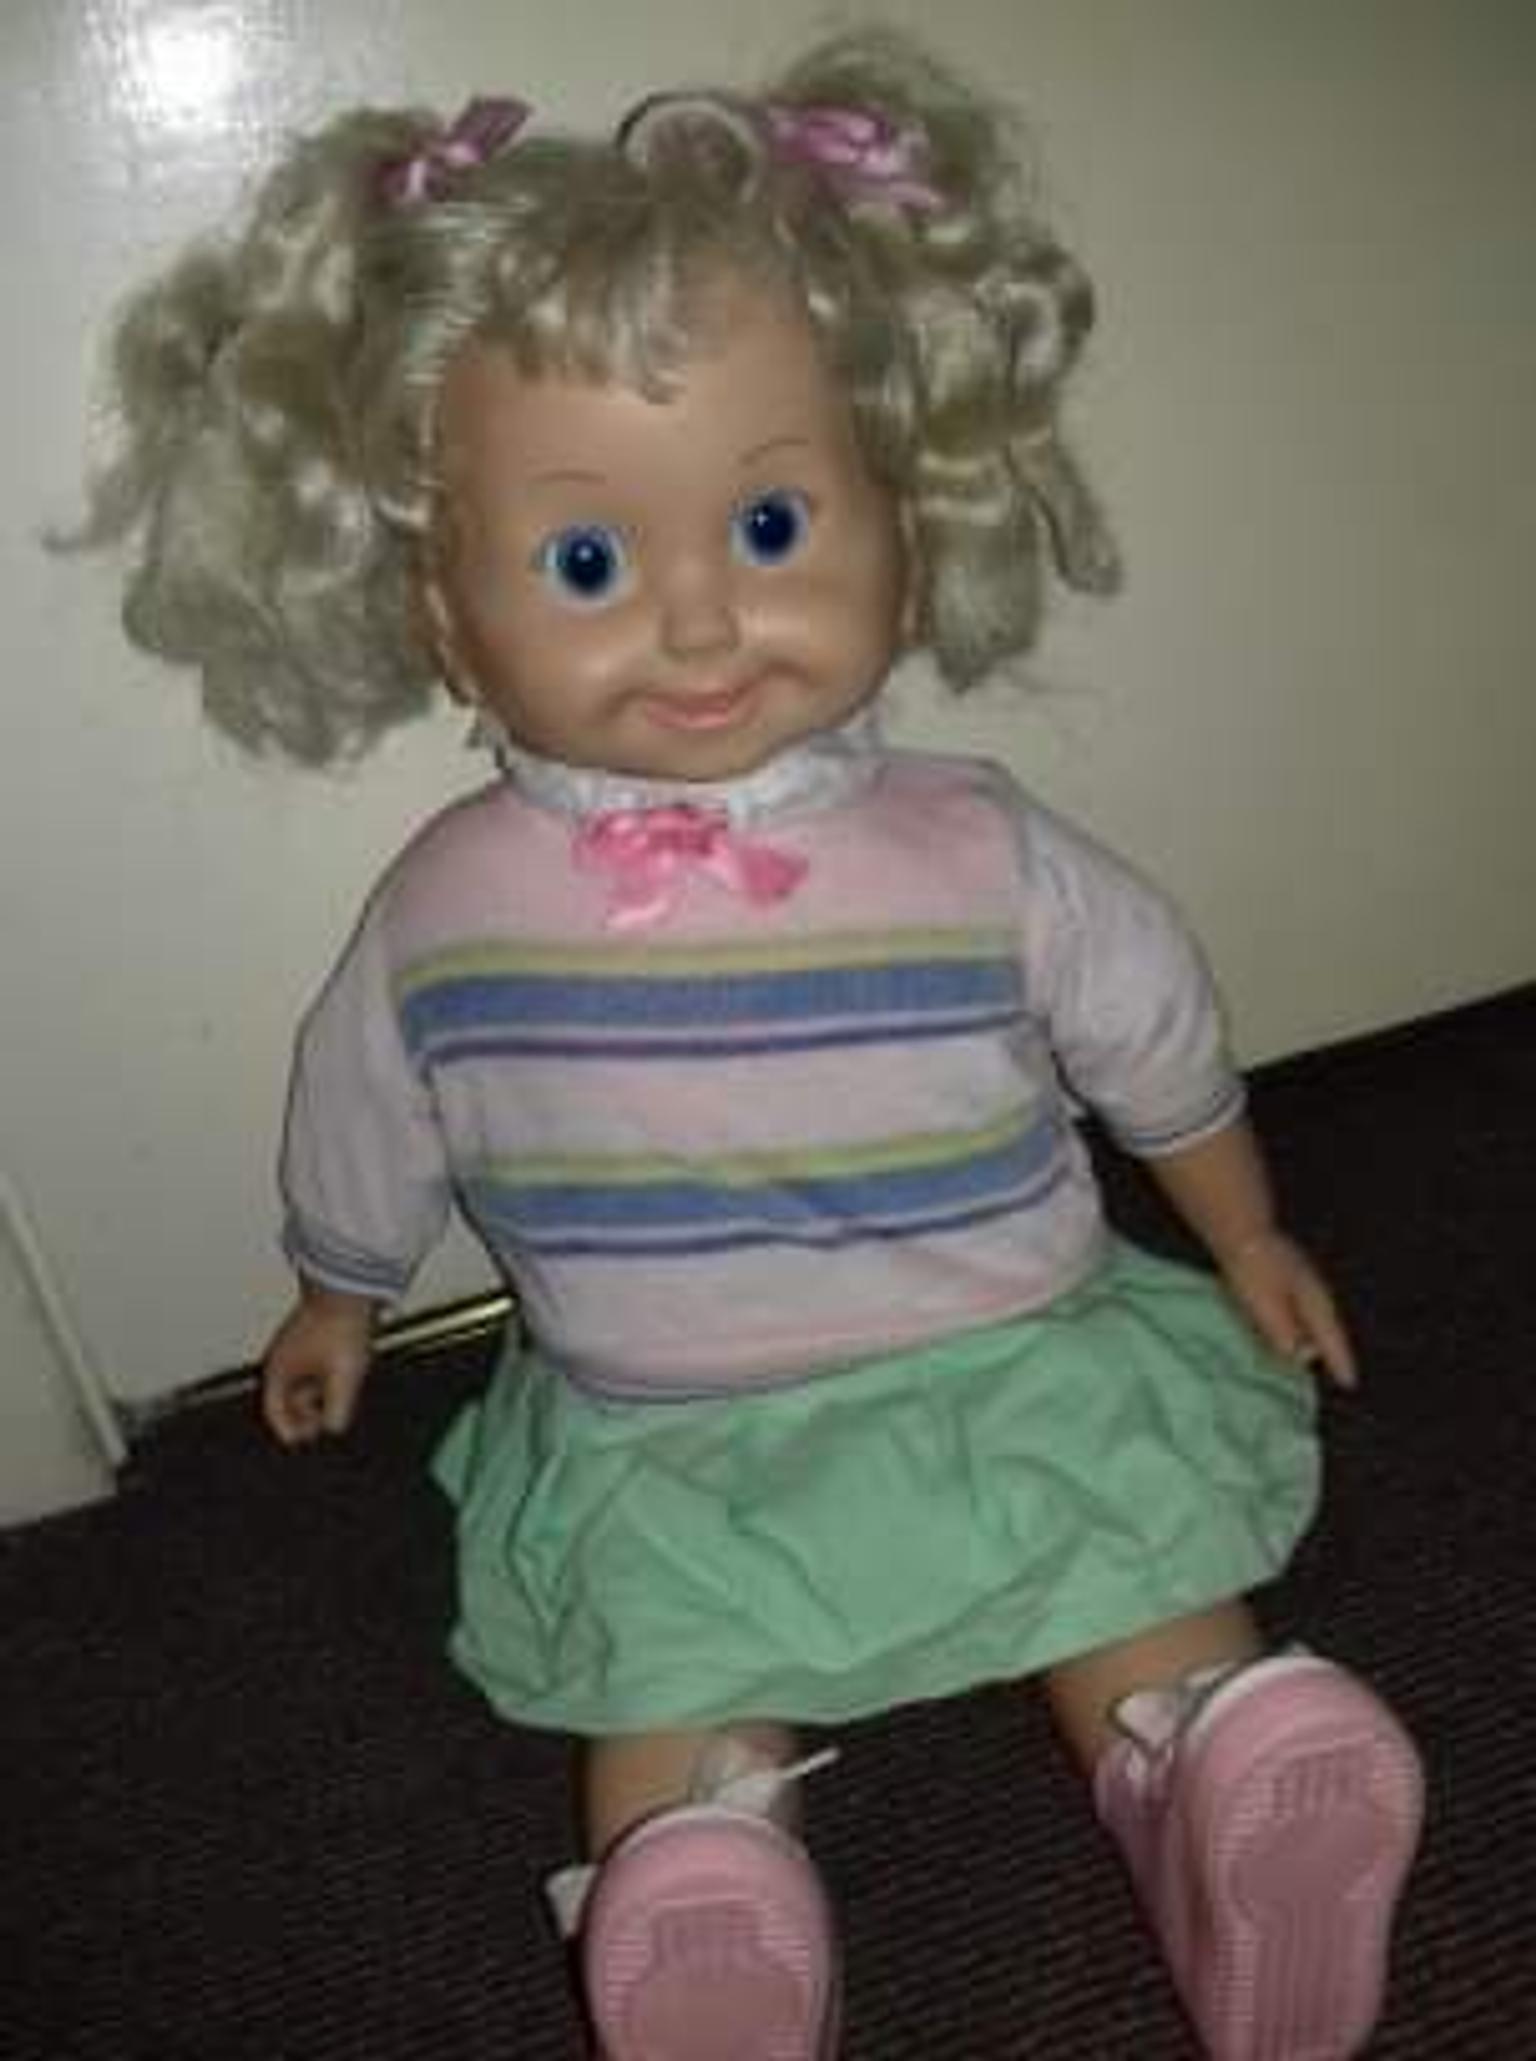 ideal cricket doll for sale